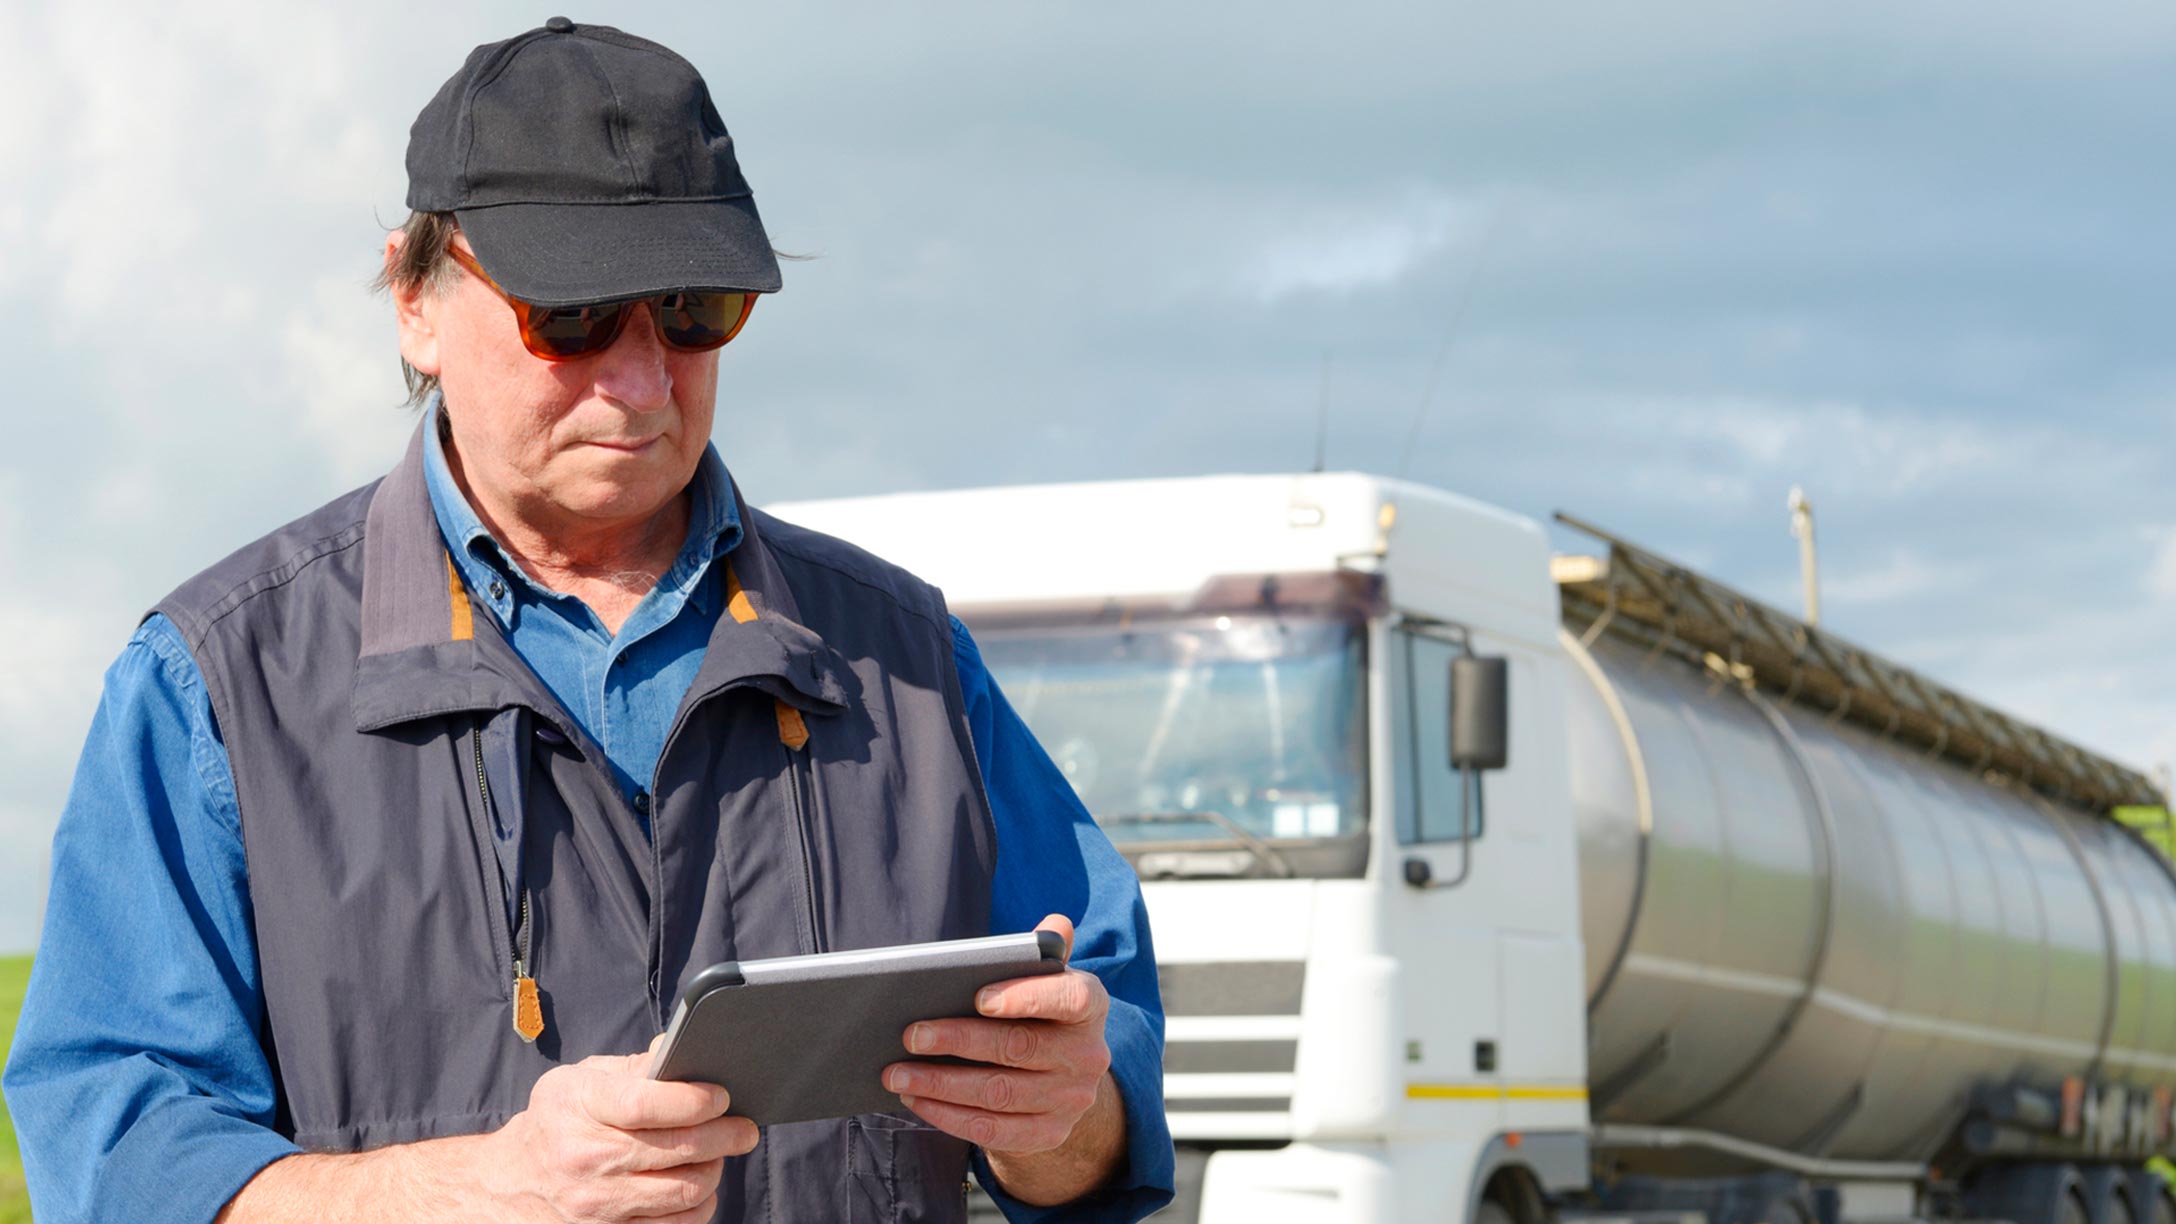 Man in a vest using an electronic logging device outside in front of a truck